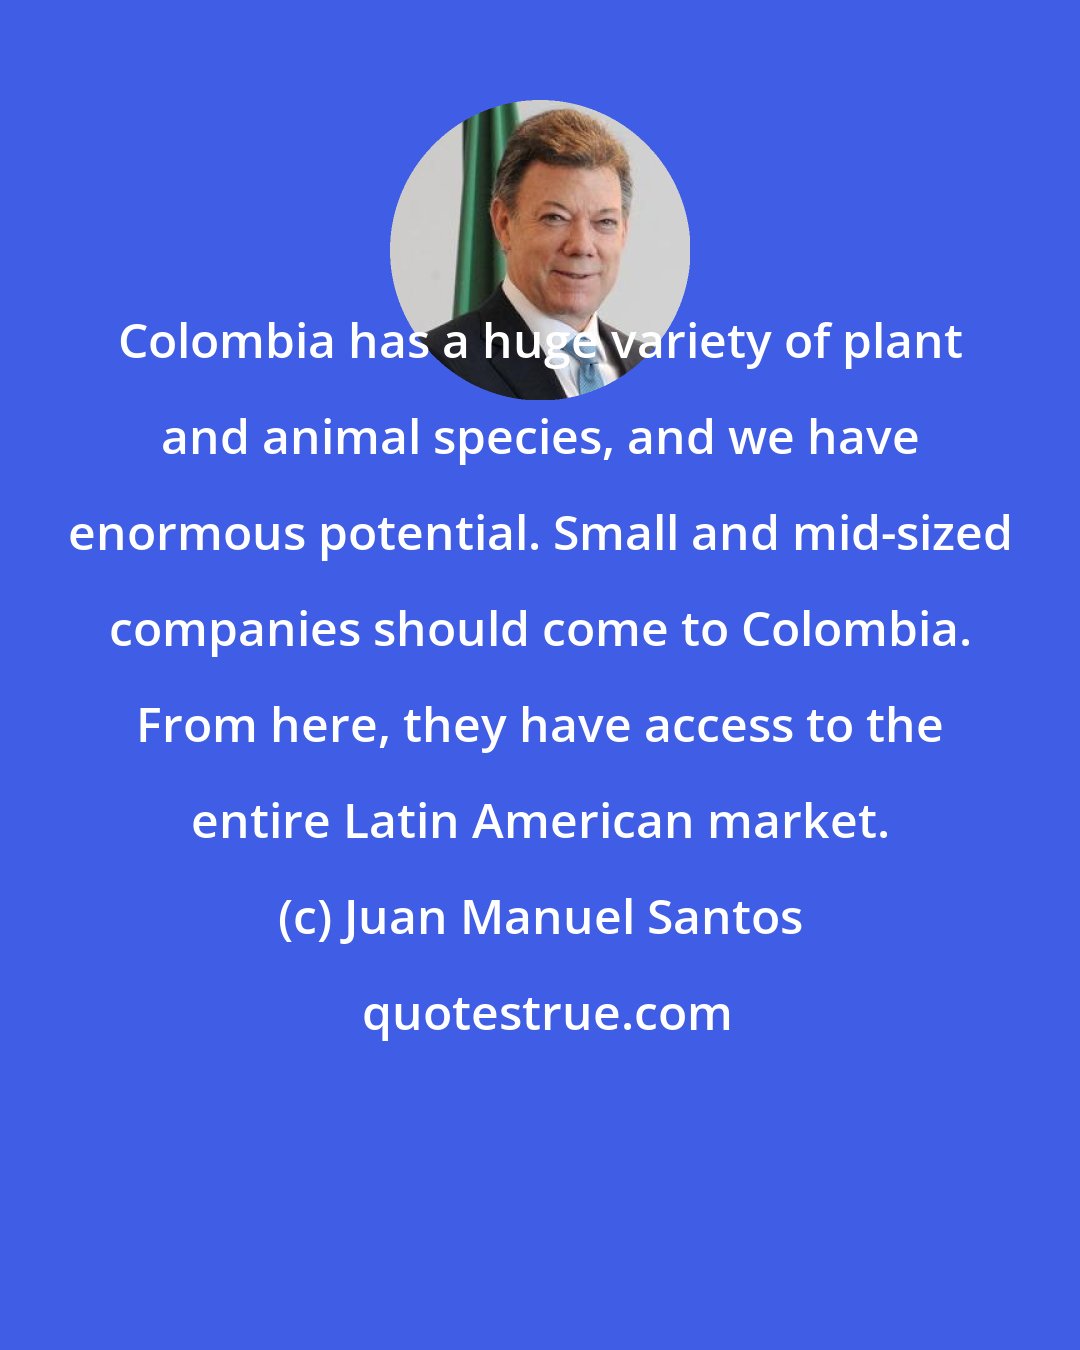 Juan Manuel Santos: Colombia has a huge variety of plant and animal species, and we have enormous potential. Small and mid-sized companies should come to Colombia. From here, they have access to the entire Latin American market.